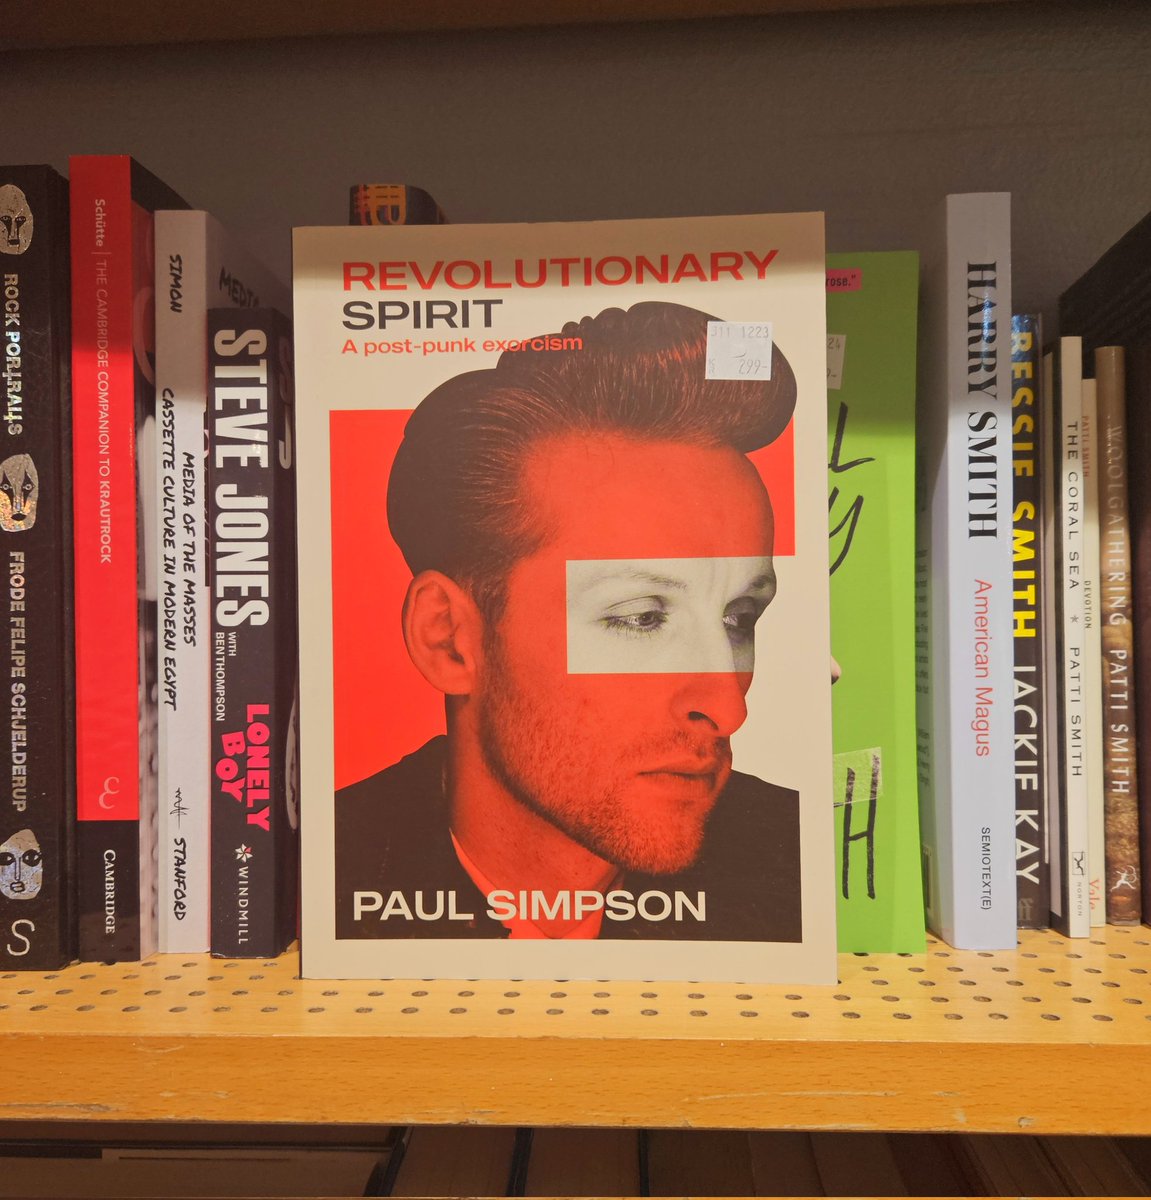 You've arrived in Oslo's coolest independent book shop @MrPaulSimpson1 and I didn't even have to put in a special order to get you here.